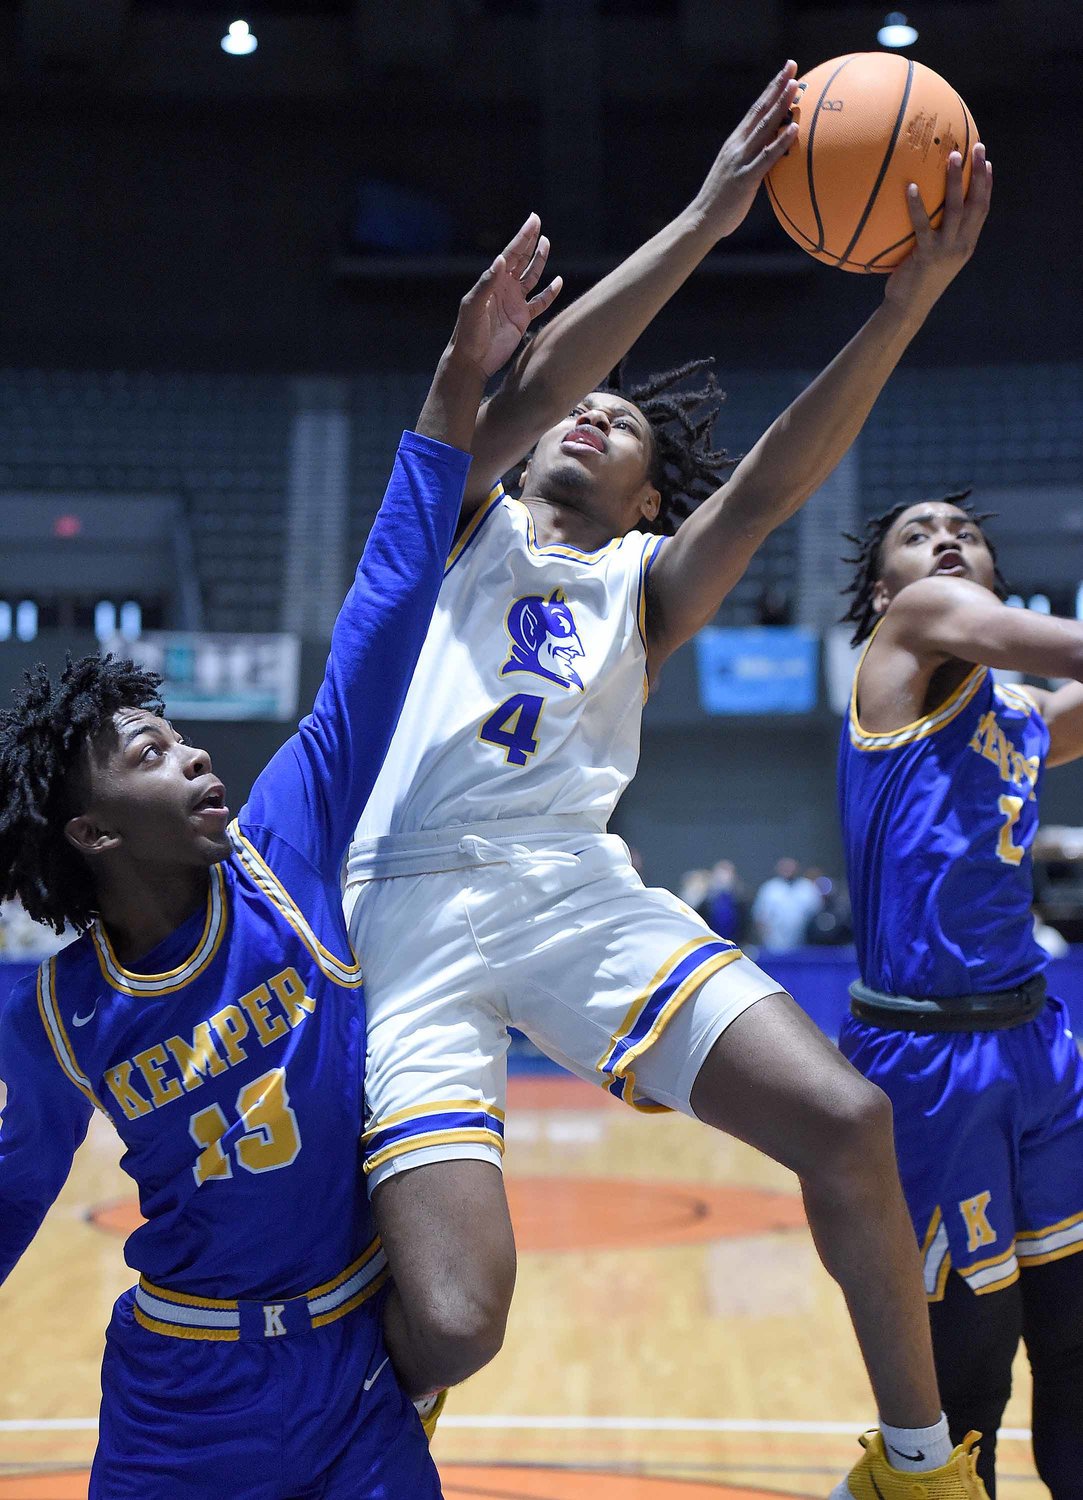 Kemper County's Aiden Bourrage (13) defends against Booneville's Dicorean McGee (4) at the MHSAA State Basketball Tournament  semifinals on Wednesday, March 3, 2021, at the Mississippi Coliseum in Jackson, Miss.